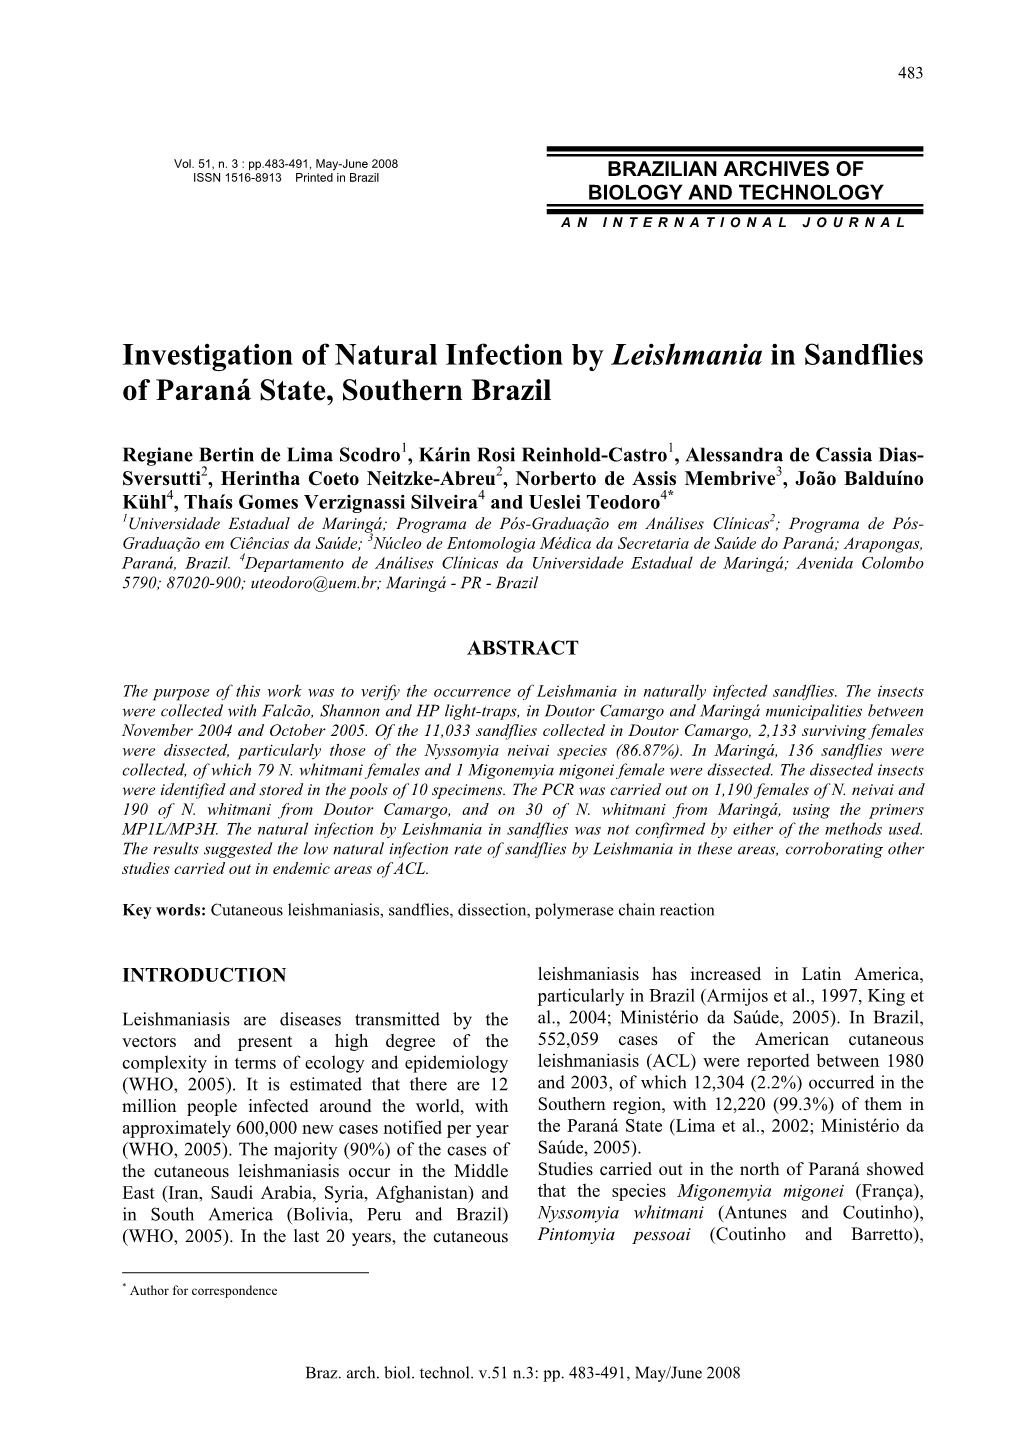 Investigation of Natural Infection by Leishmania in Sandflies of Paraná State, Southern Brazil